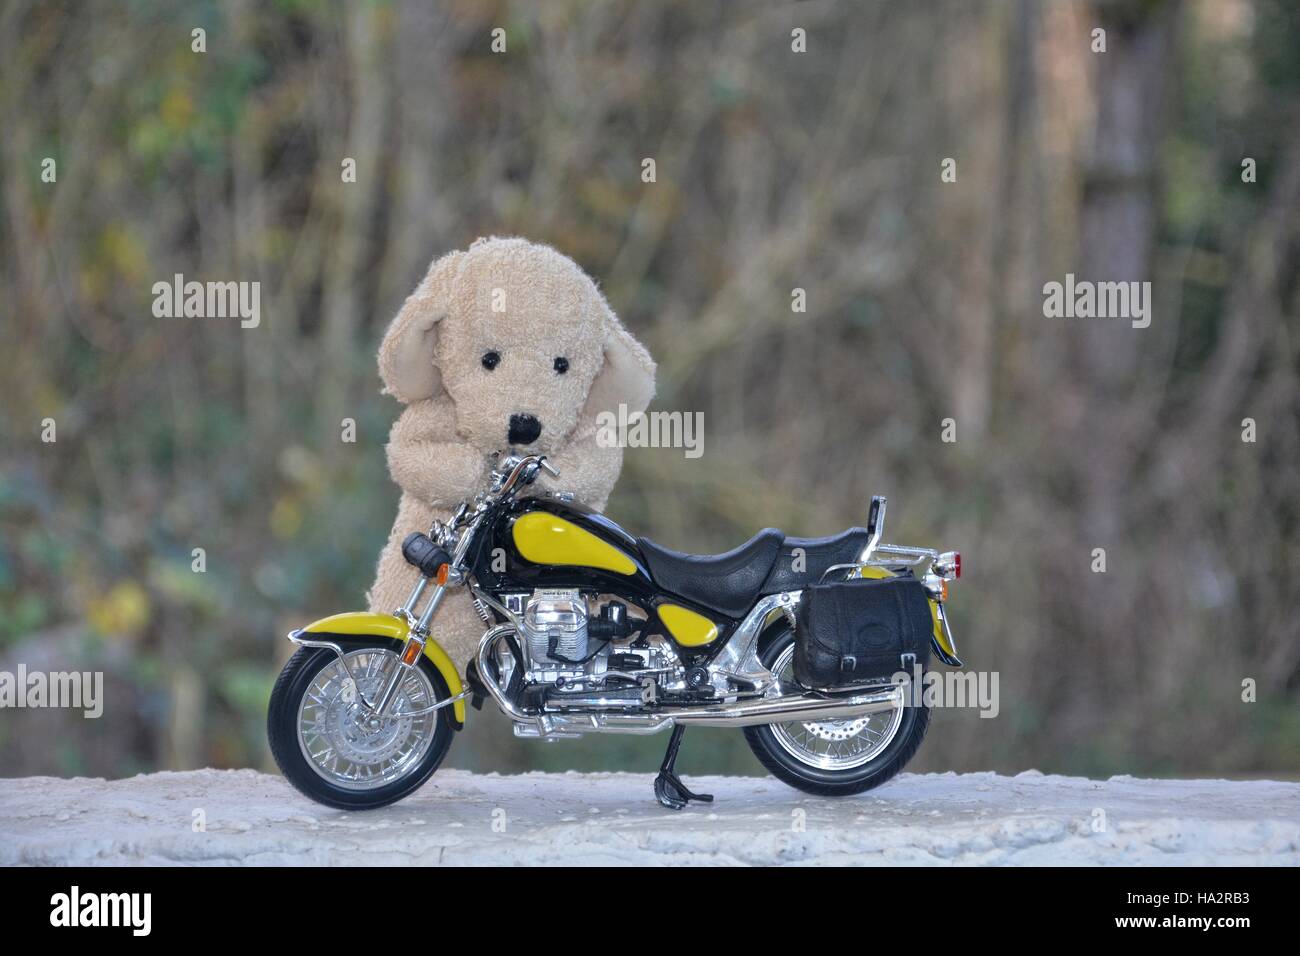 Dog soft toy stands behind a motorcycle outside Stock Photo